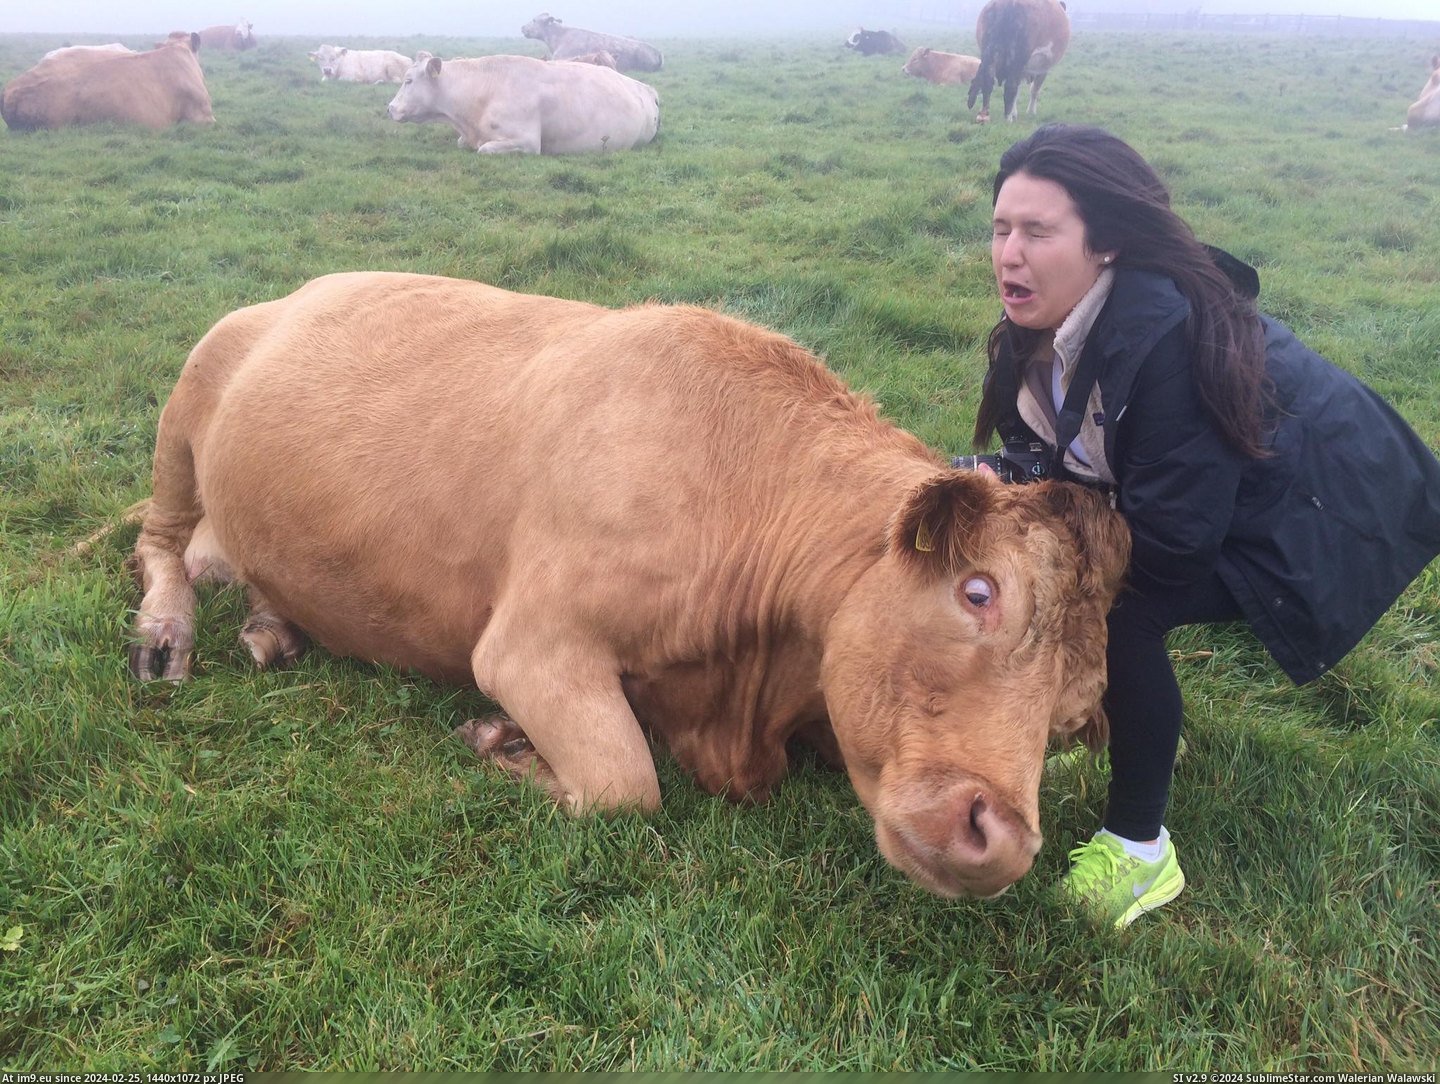 #Sister  #Cow [Pics] My sister getting headbutted by a cow Pic. (Bild von album My r/PICS favs))